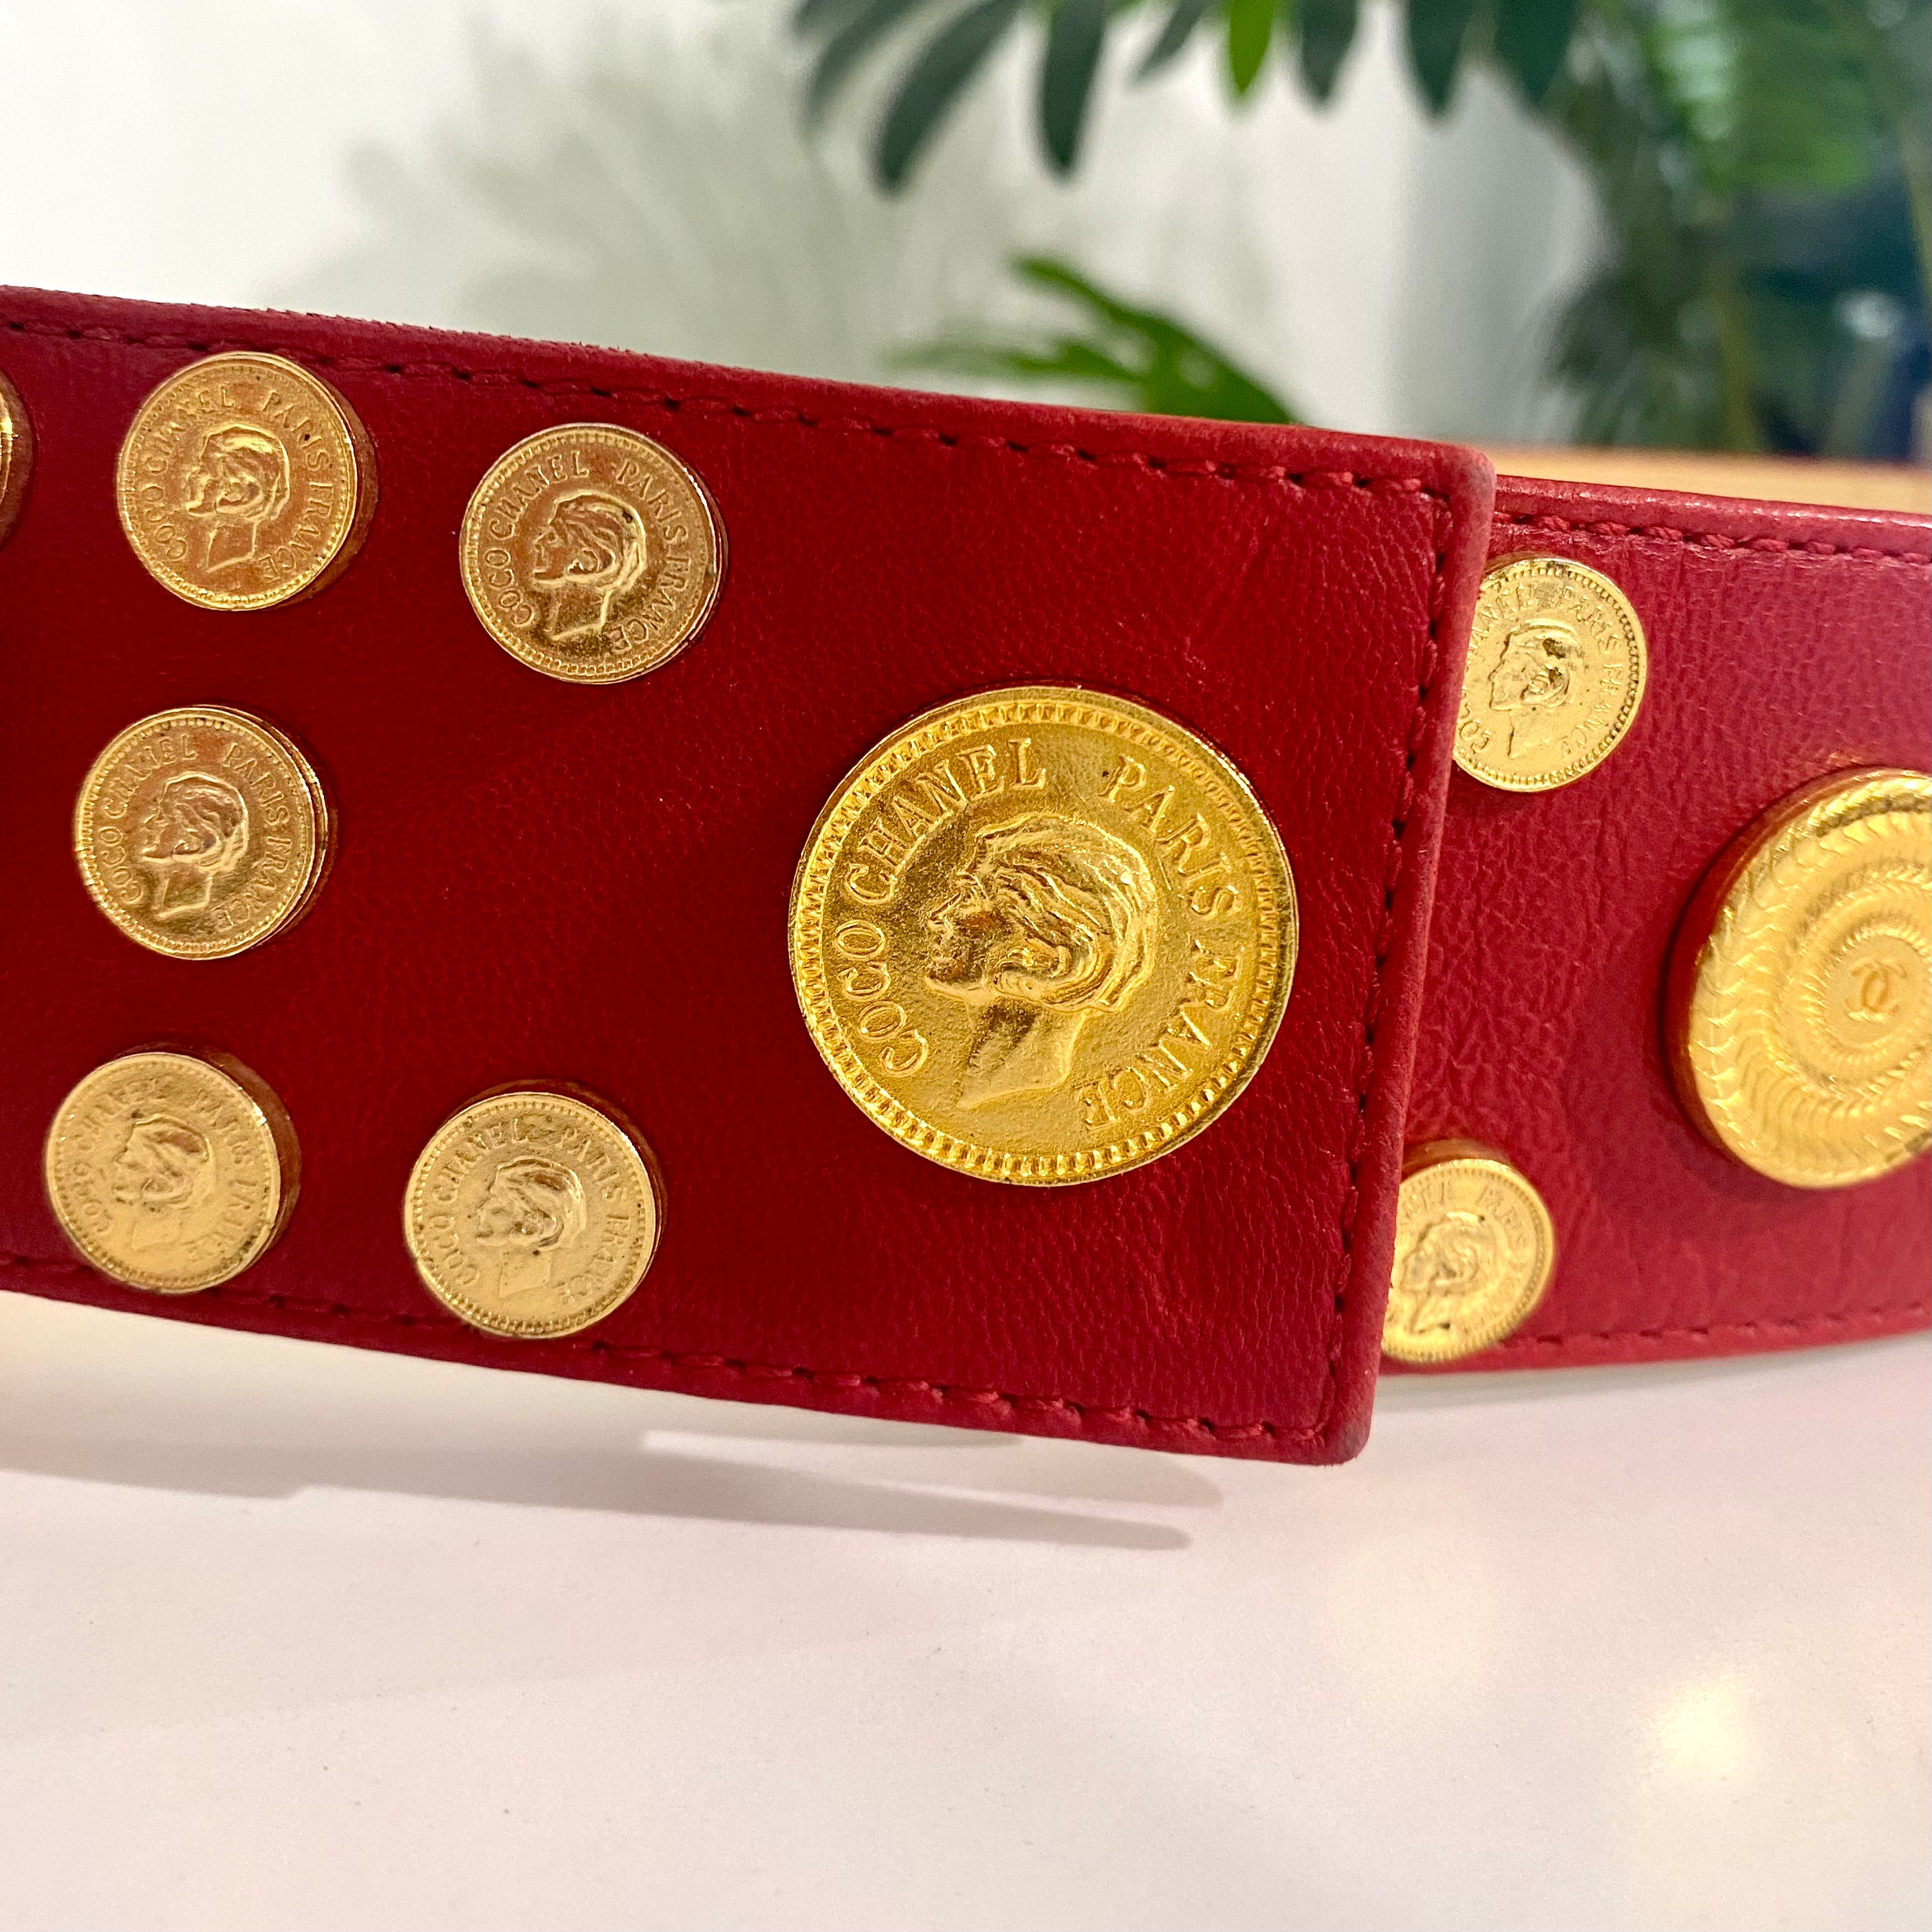 Chanel Gold Coin Red Leather Belt